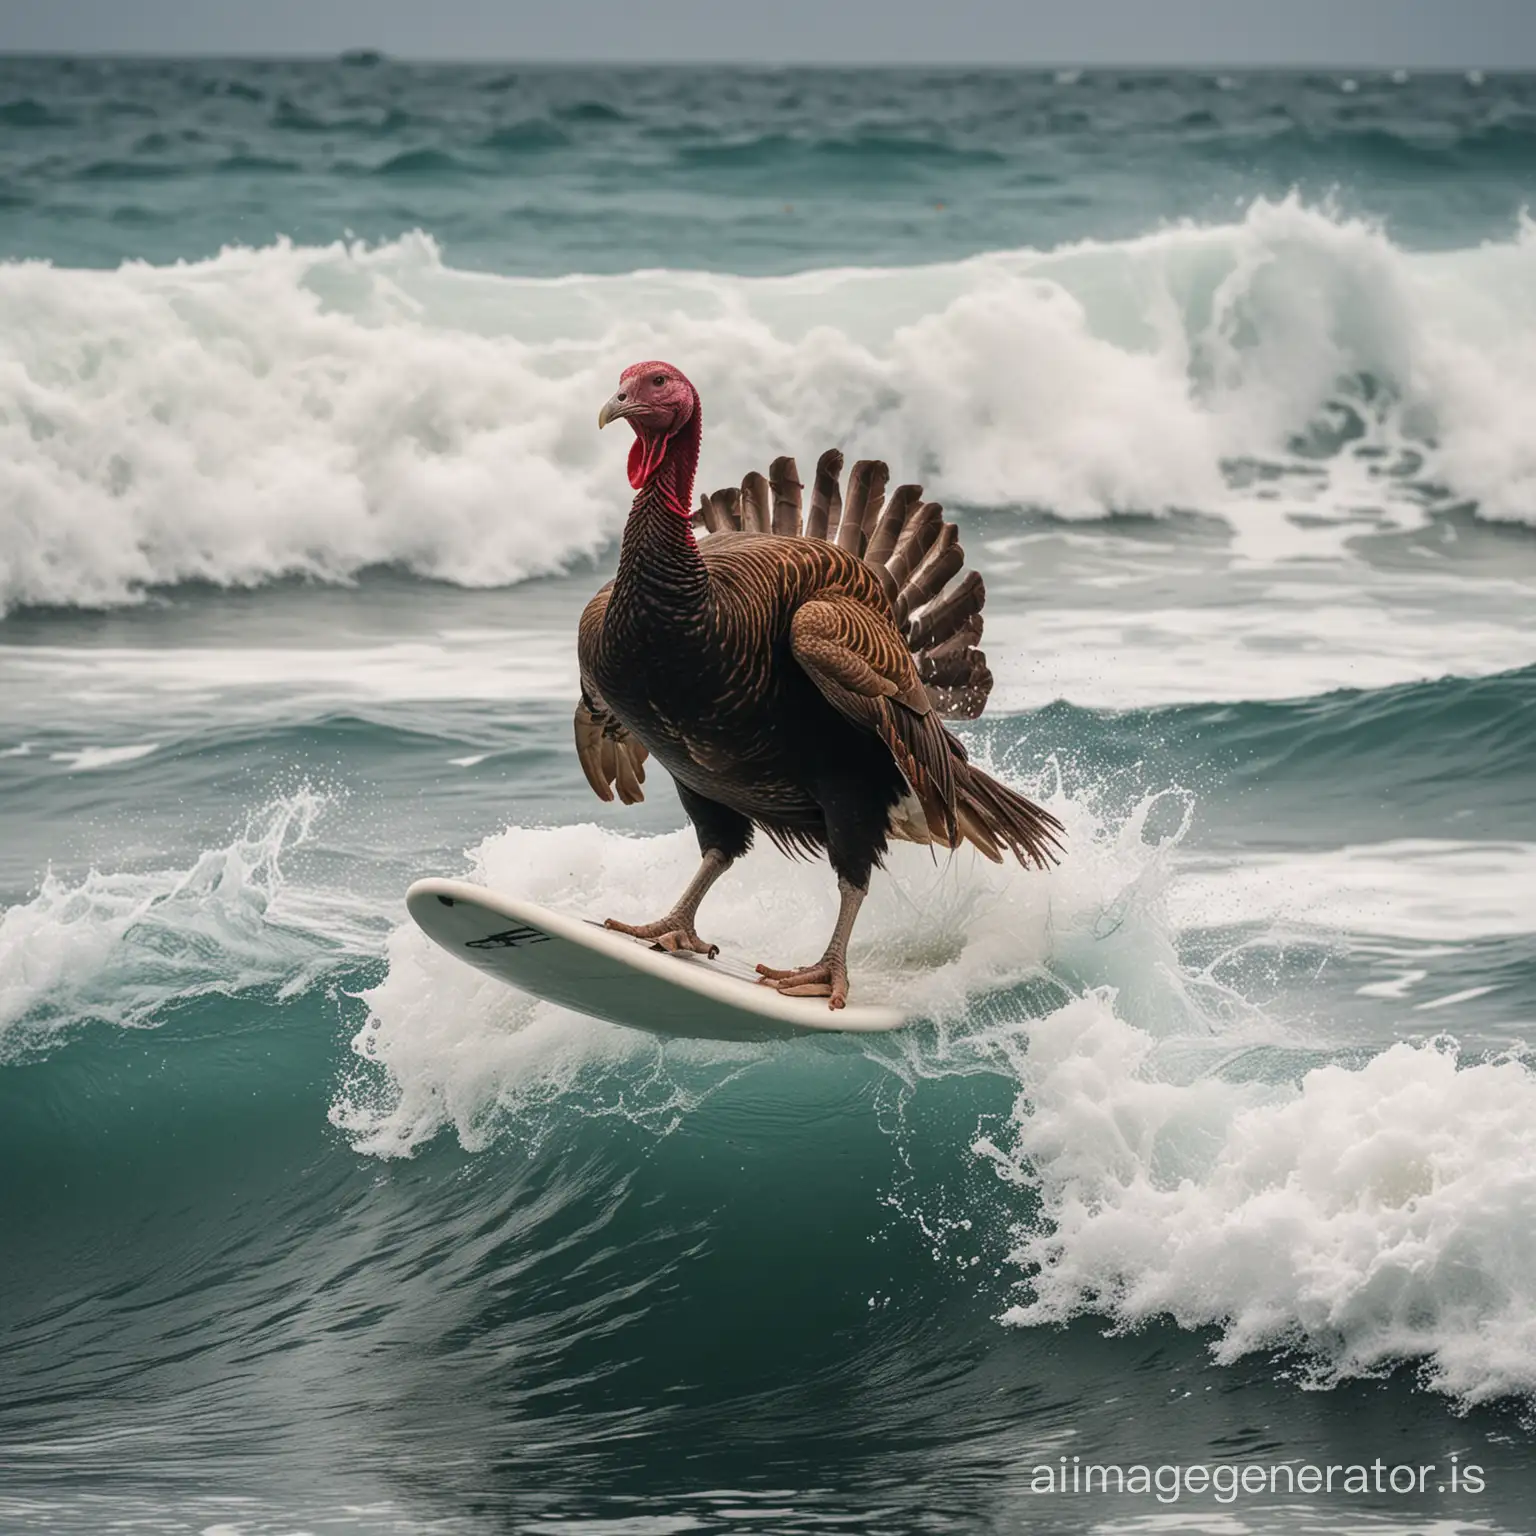 a photo of a turkey surfing in the ocean